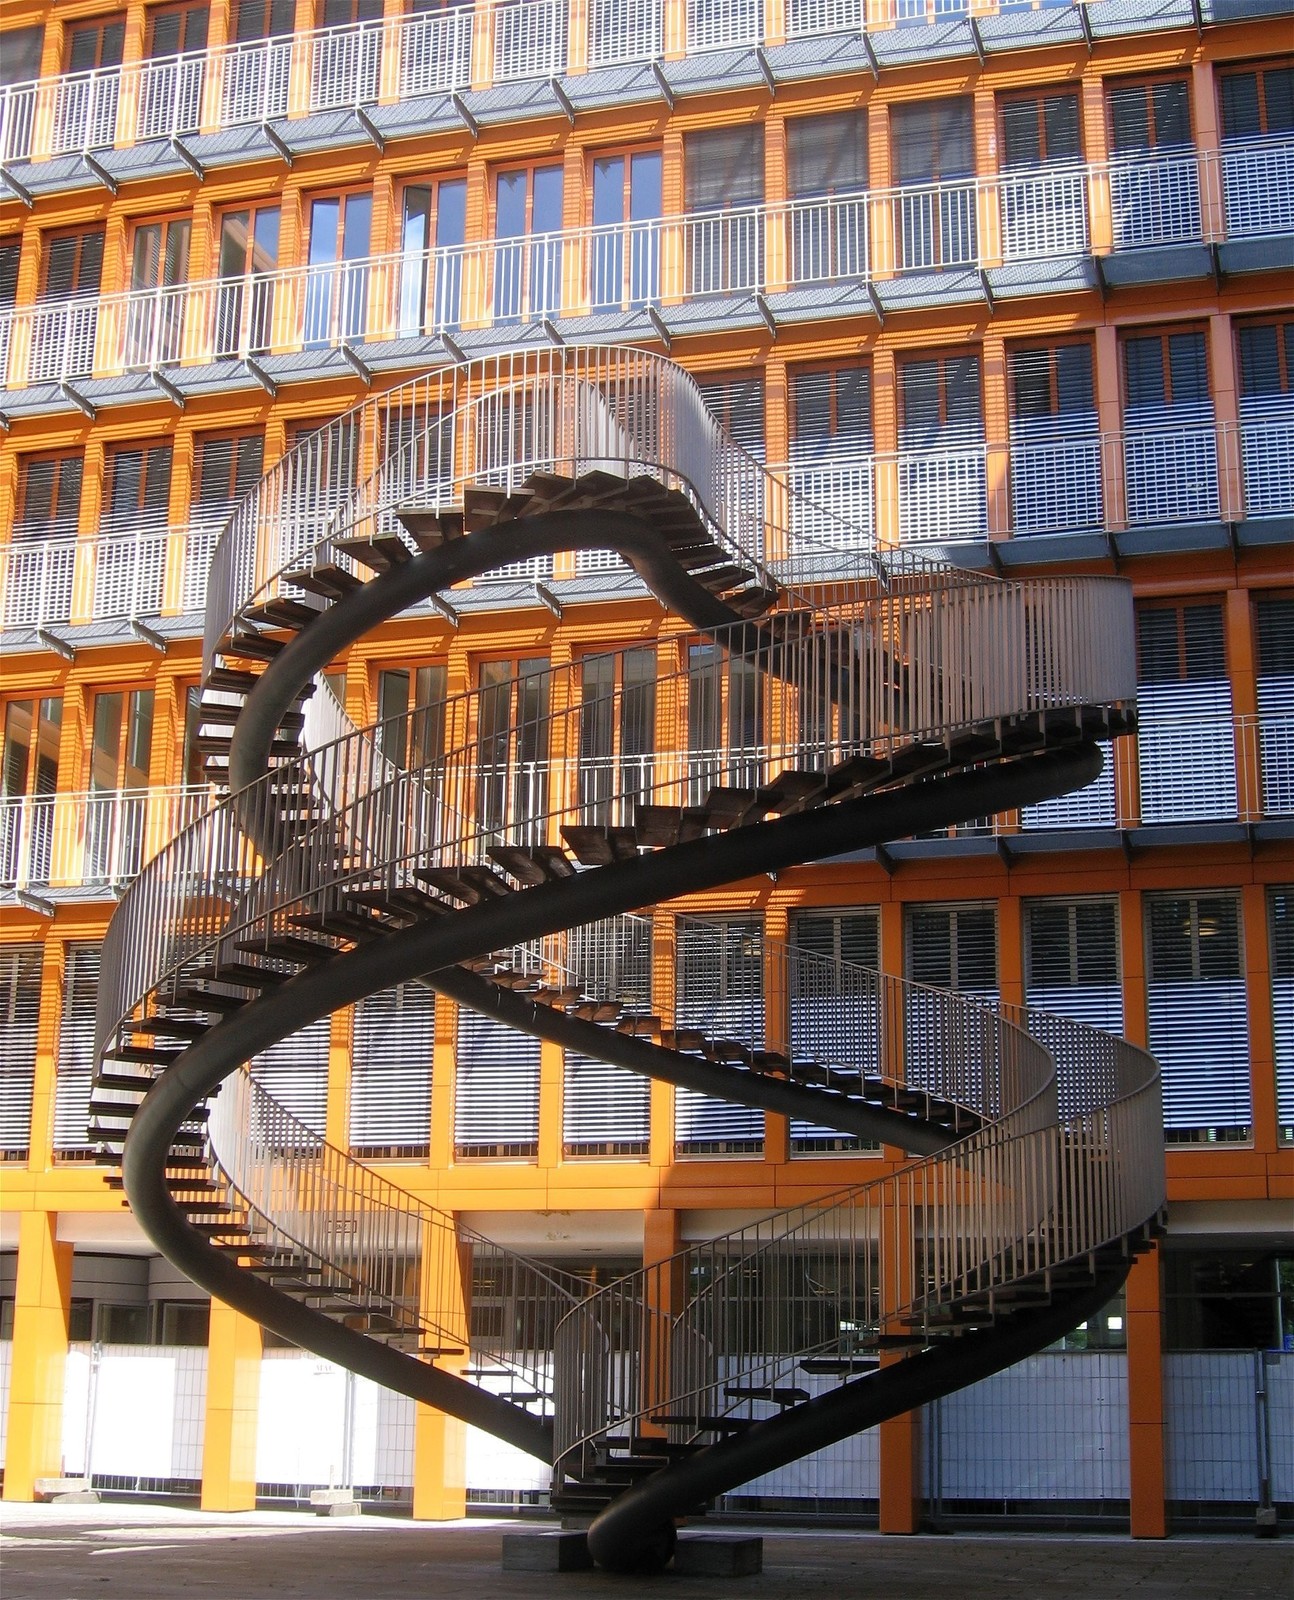 Olafur Eliasson. Umschreibung (Rewriting). The Infinite Staircase. 2004. Munich, Germany.